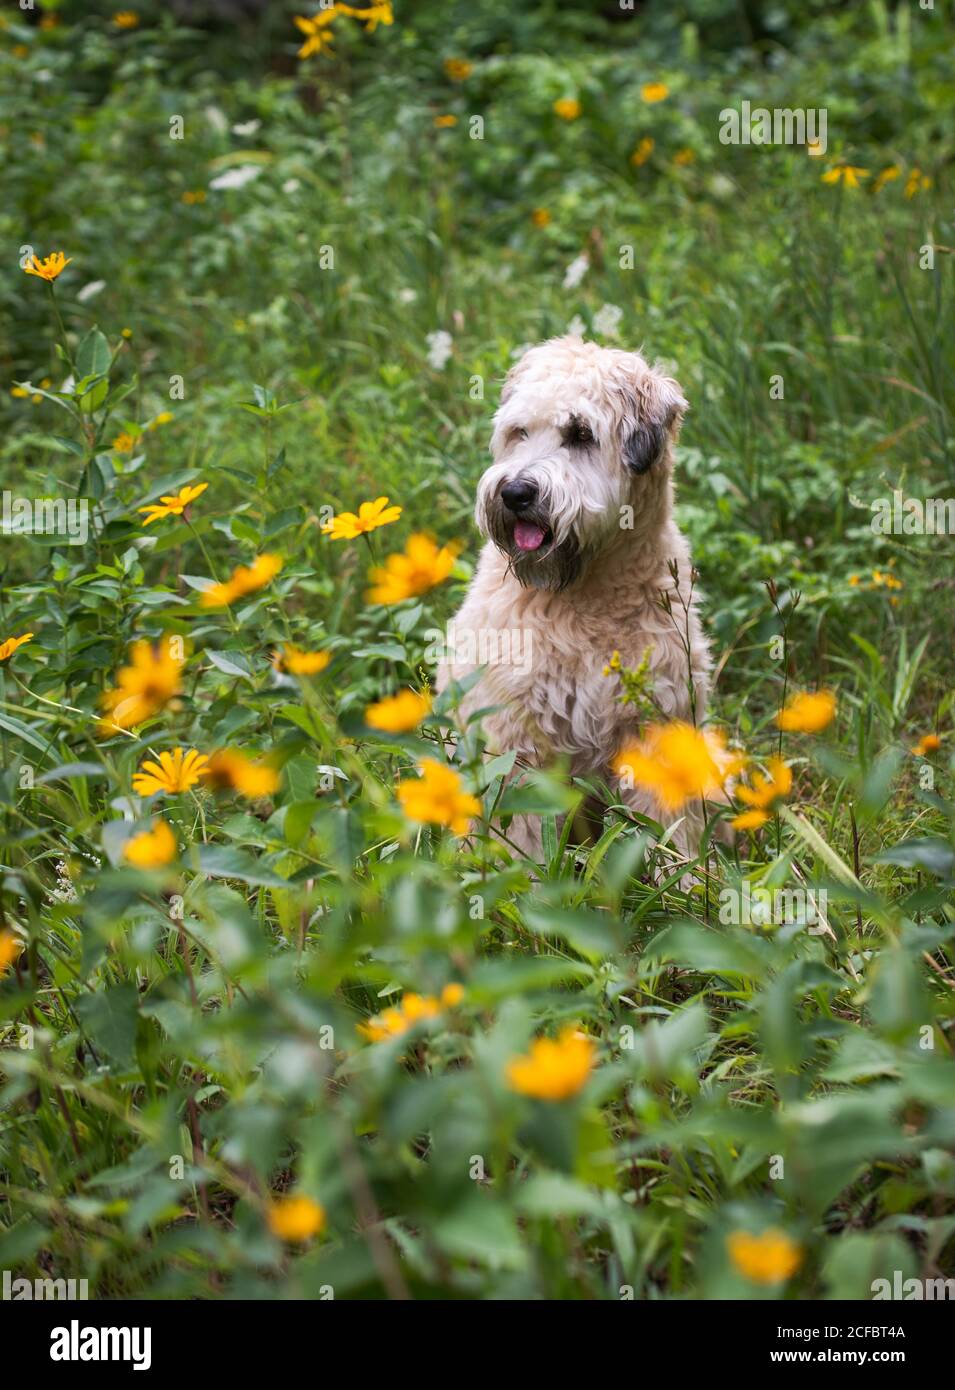 Wheaten terrier dog sitting in a field of tall grass and wildflowers. Stock Photo